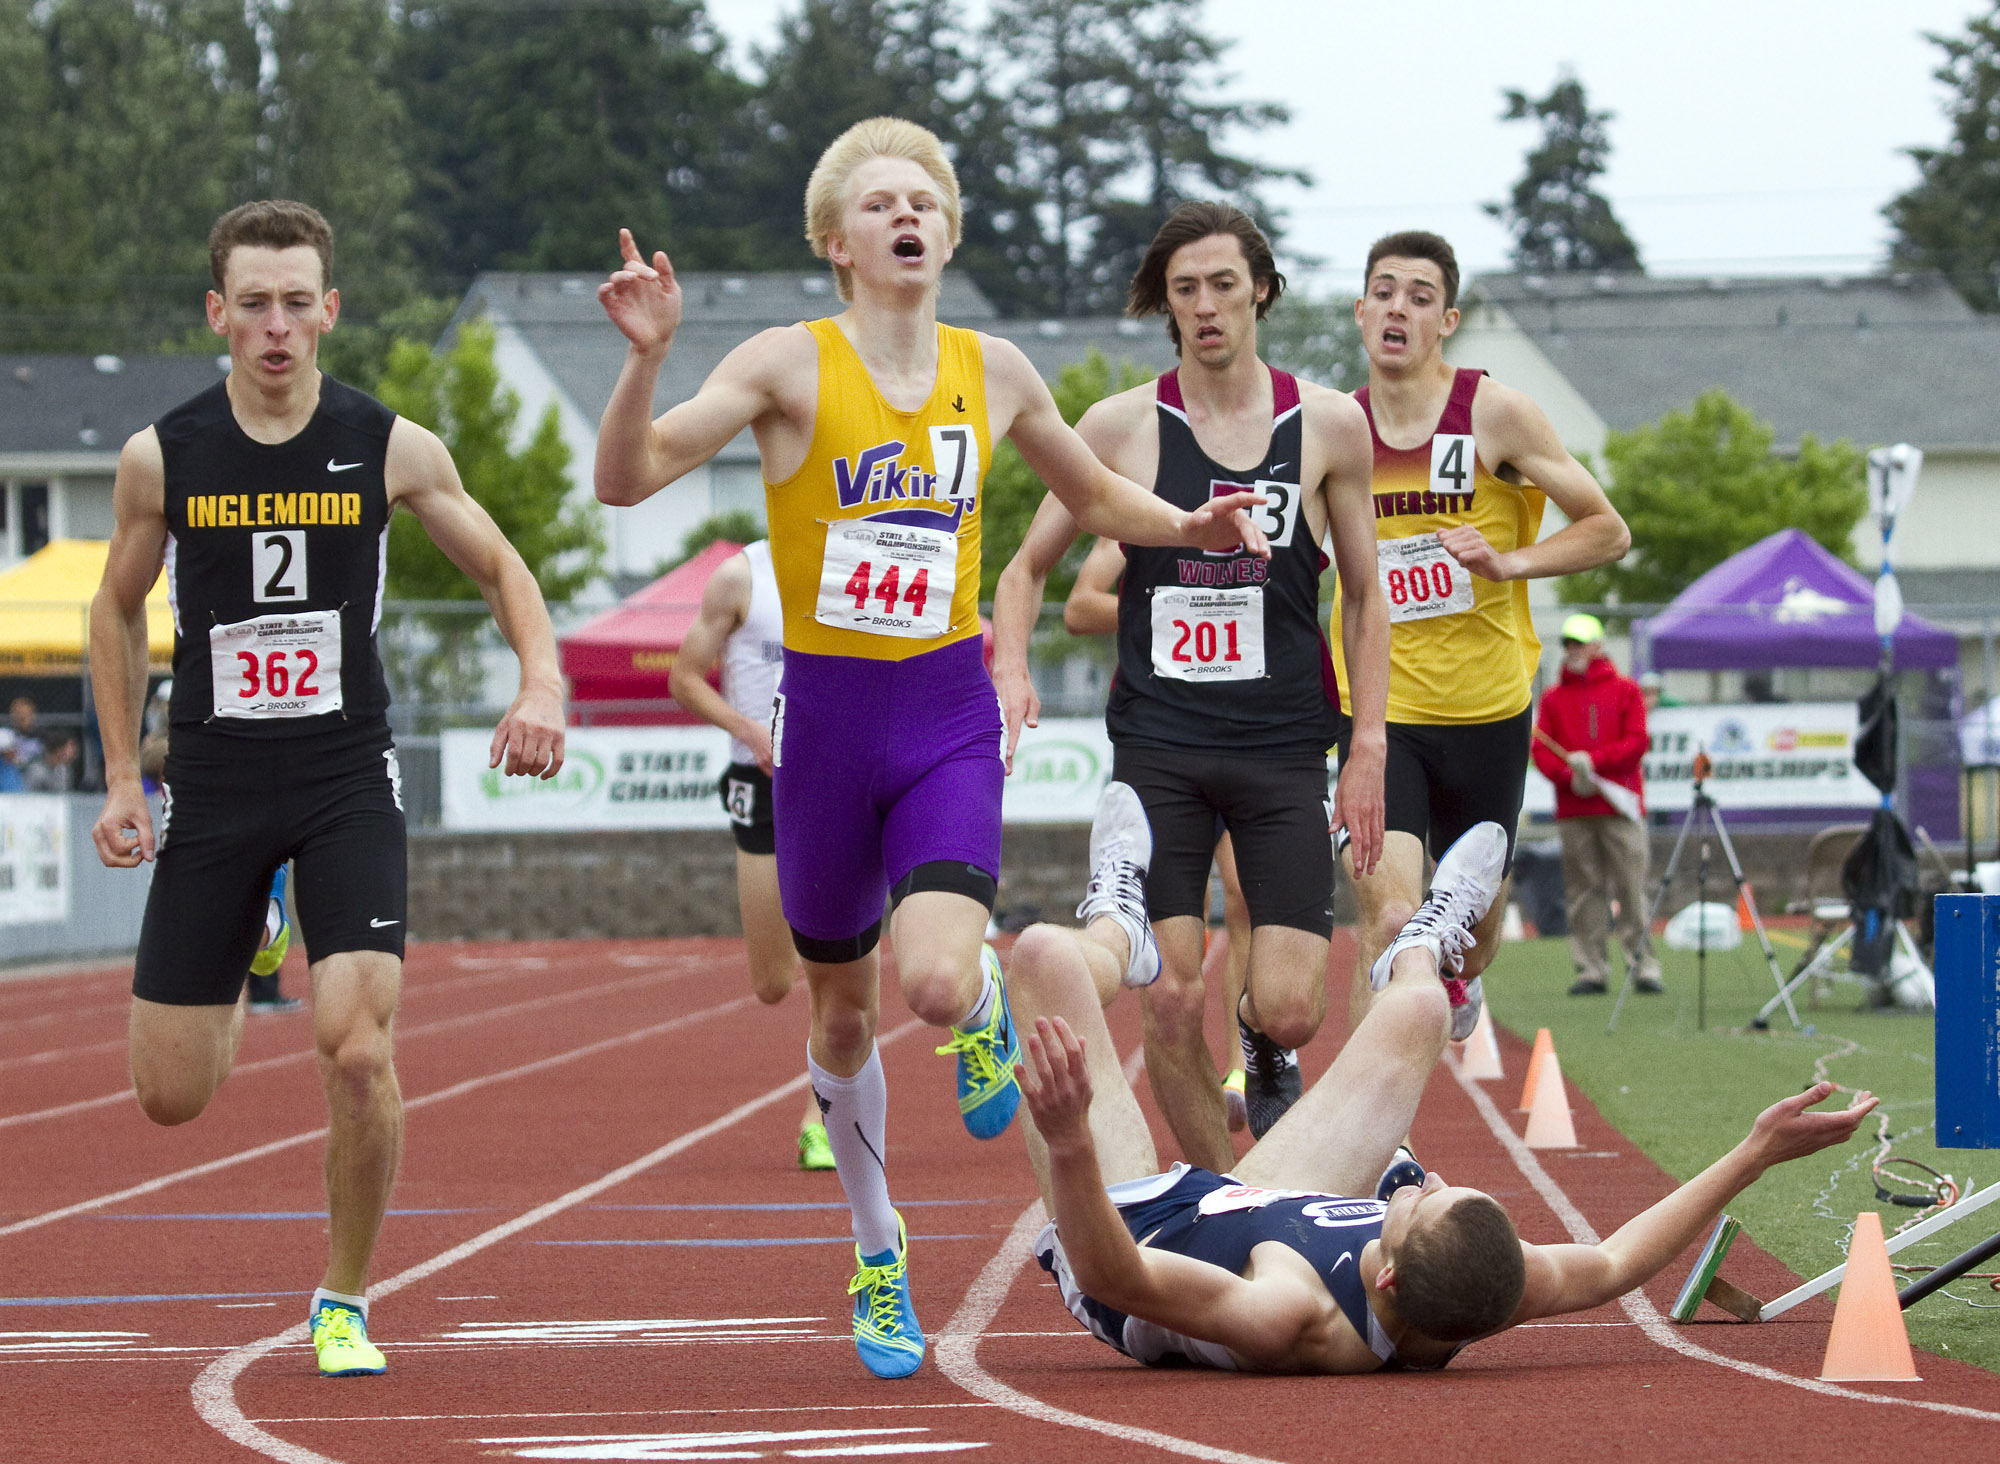 Skyview's Mason Scheidel, right on ground, dove across the finish line in an attempt to win the 4A Boys 800 Meter Run at the State Track and Field Championships on Saturday,  May 28, 2016, in Tacoma, Wash.